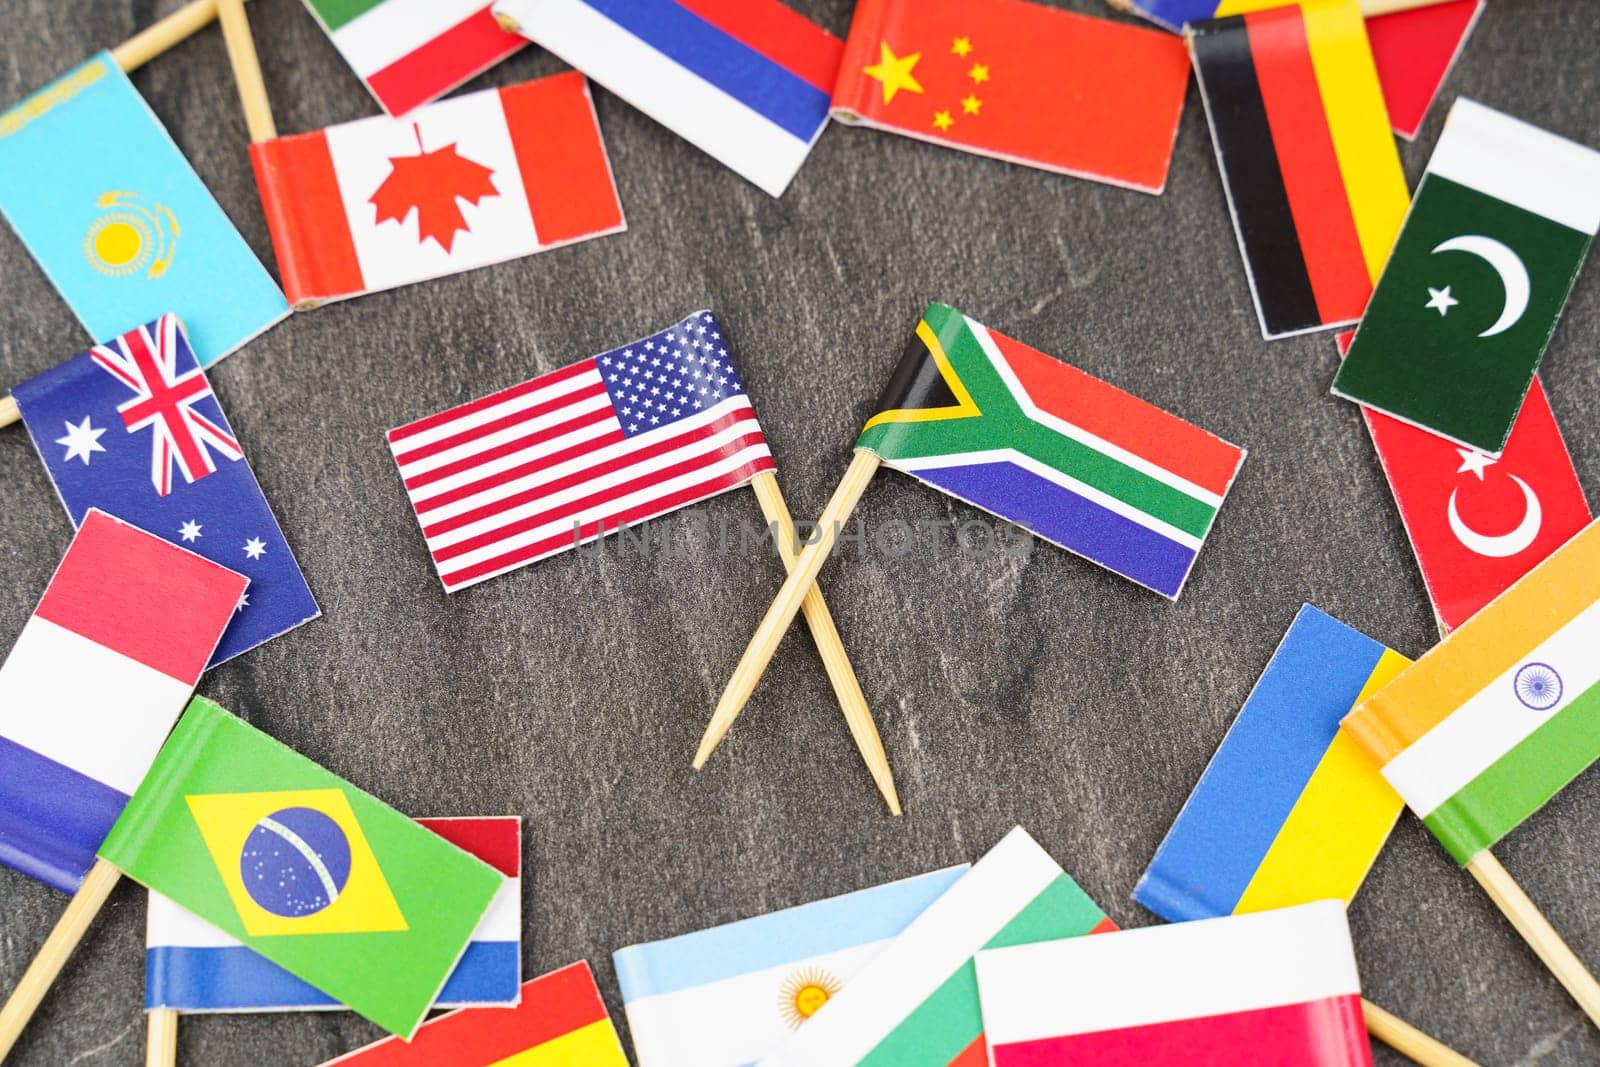 Policy. National flags of different countries. The concept is diplomacy. In the middle among the various flags are two flags - USA, South Africa